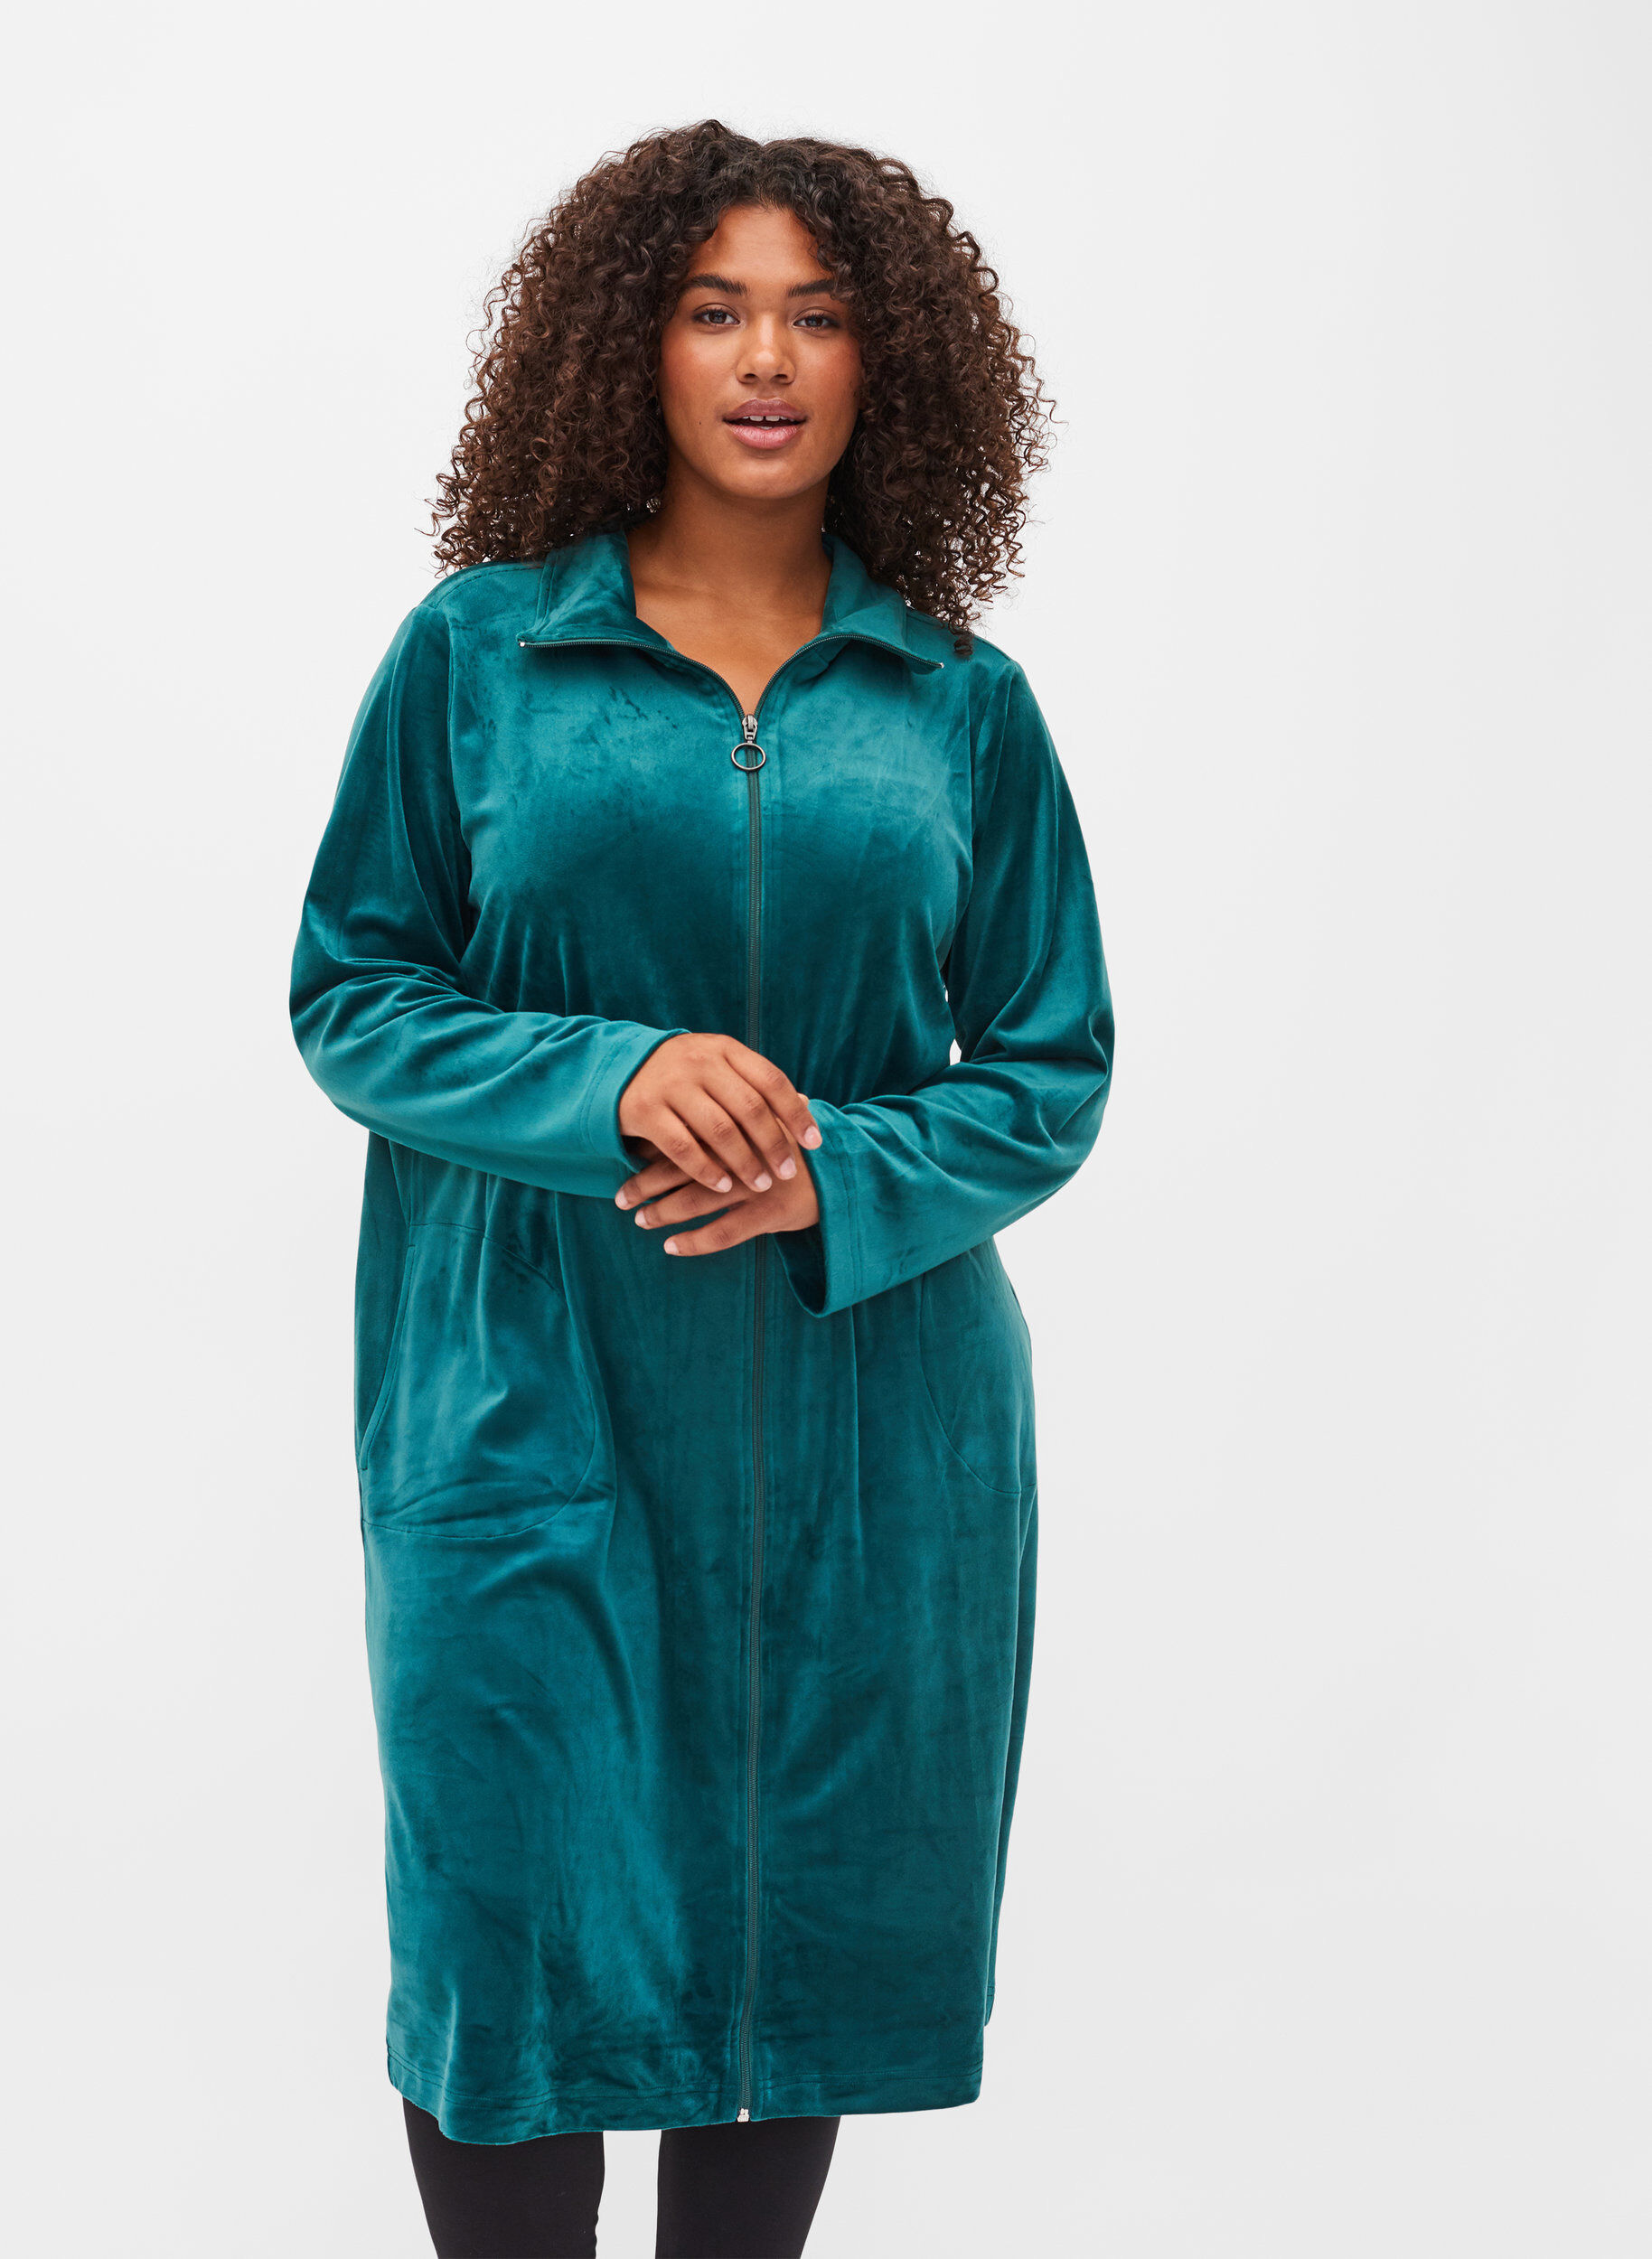 Clothing Womens Clothing Pyjamas & Robes Night Gowns & Tops Ladies Supersoft Fleece Zip Robe 